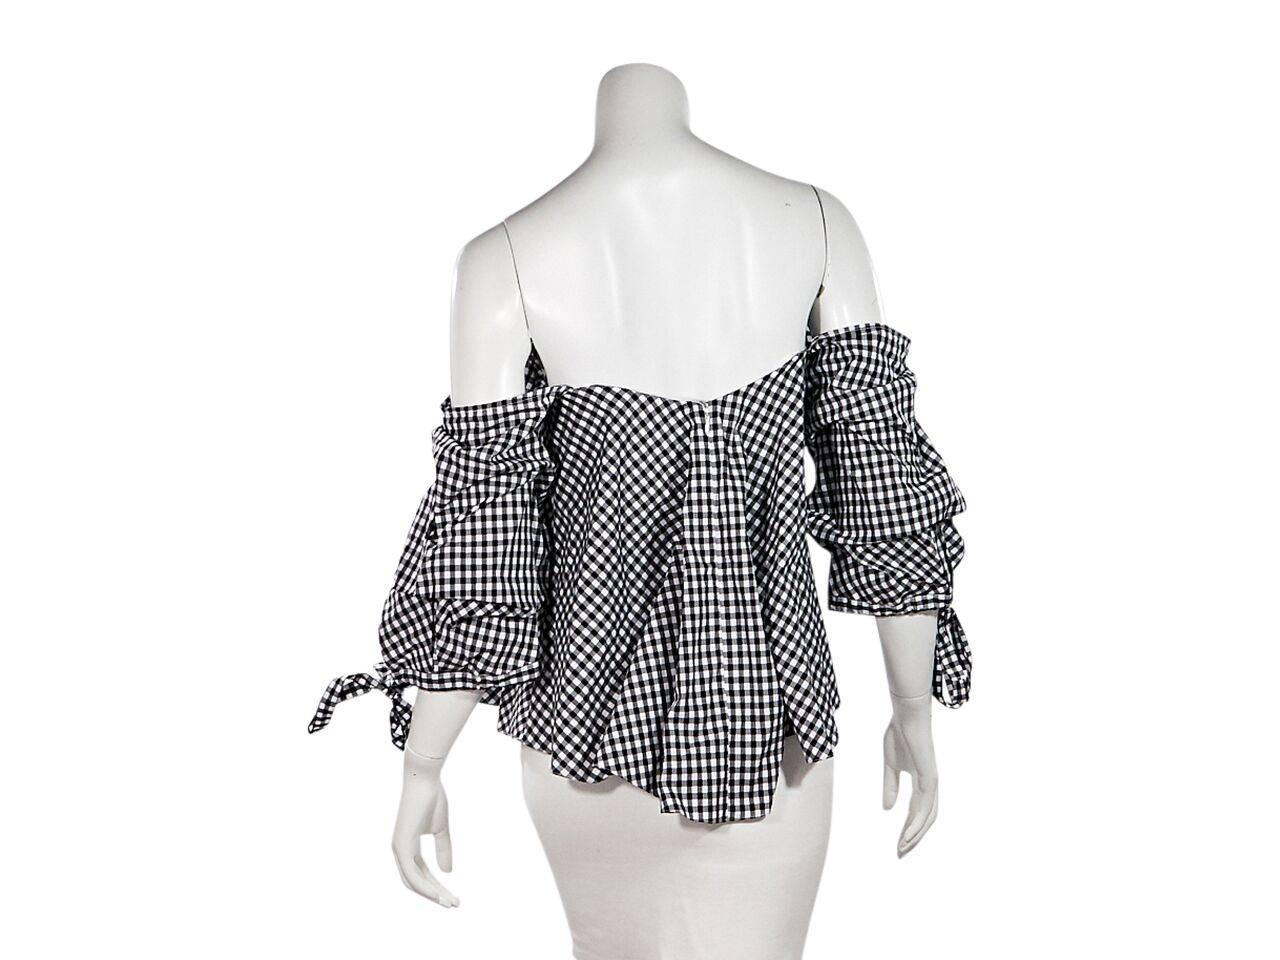 Product details:  Black and white gingham cotton off-the-shoulder top by Caroline Constas.  Sweetheart neckline.  Three-quarter length sleeves.  Tie cuffs.  Inner lining with boning.  Concealed back zip closure. 
Condition: Pre-owned. Very